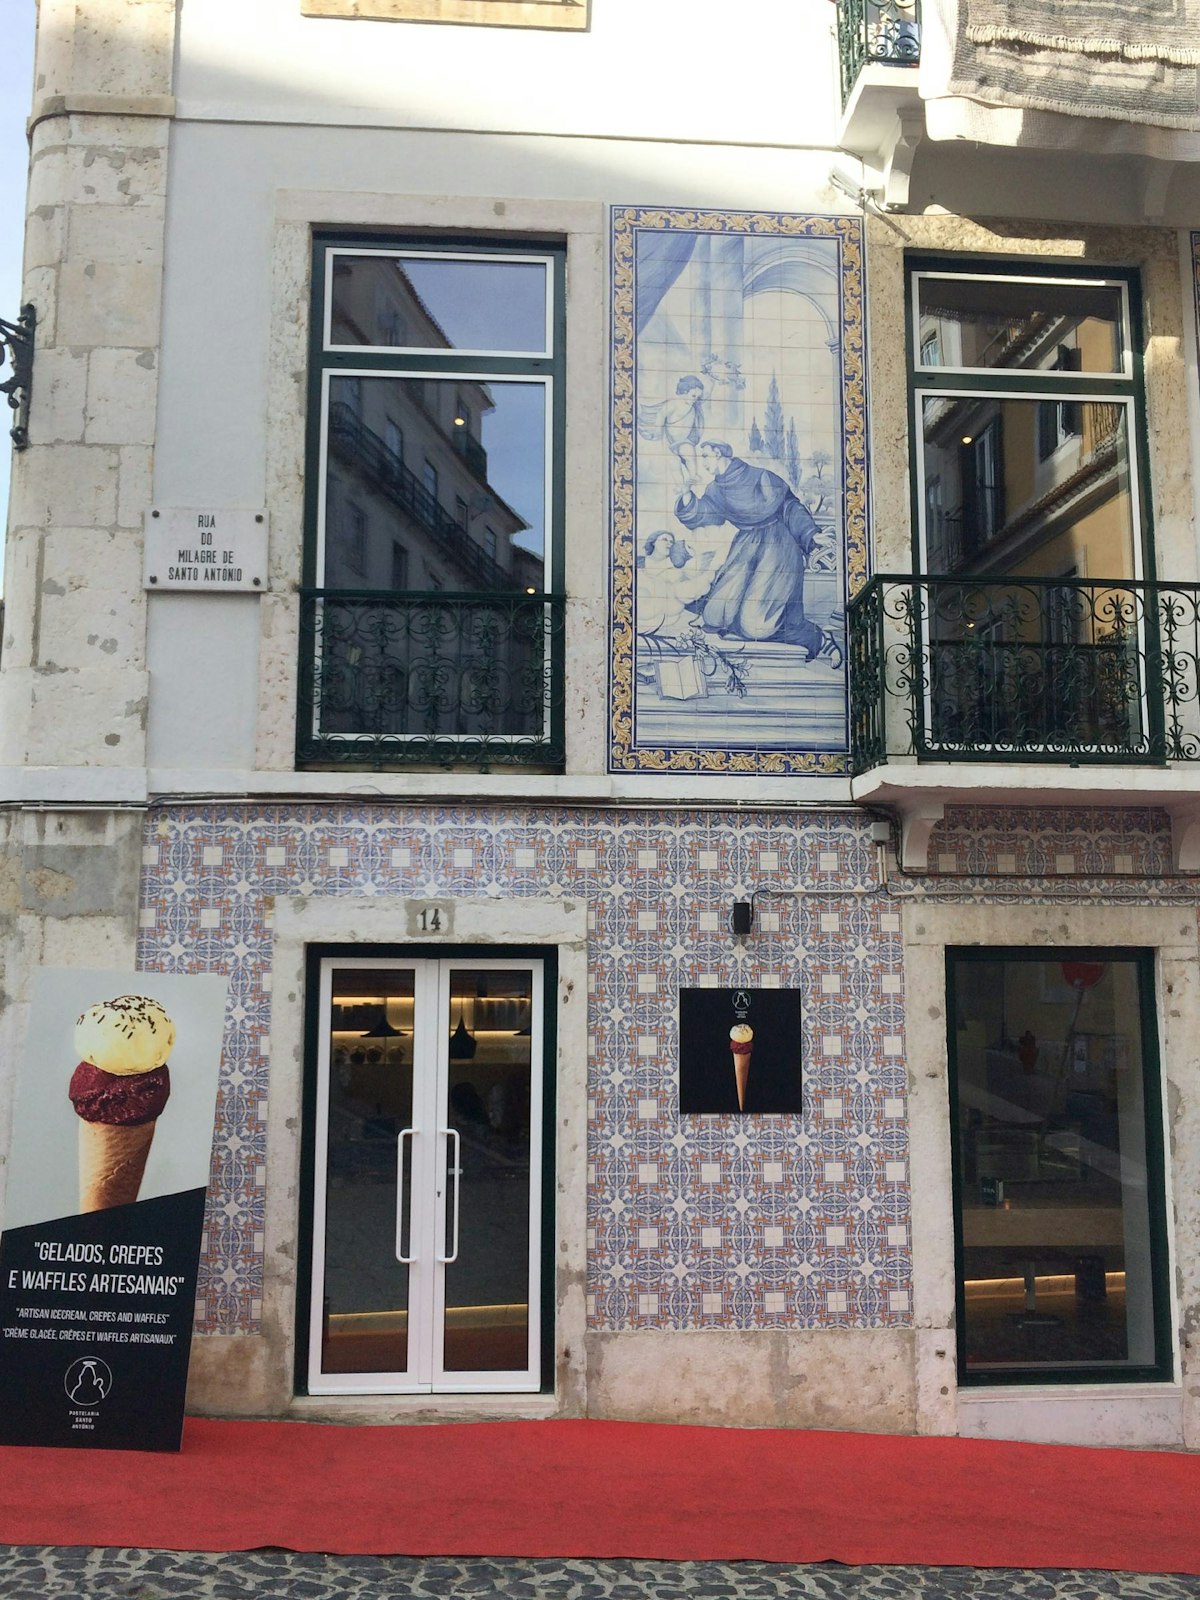 Power your climb uphill to Castelo de São Jorge with a coffee and pastel de nata at this new cafe in Lisbon